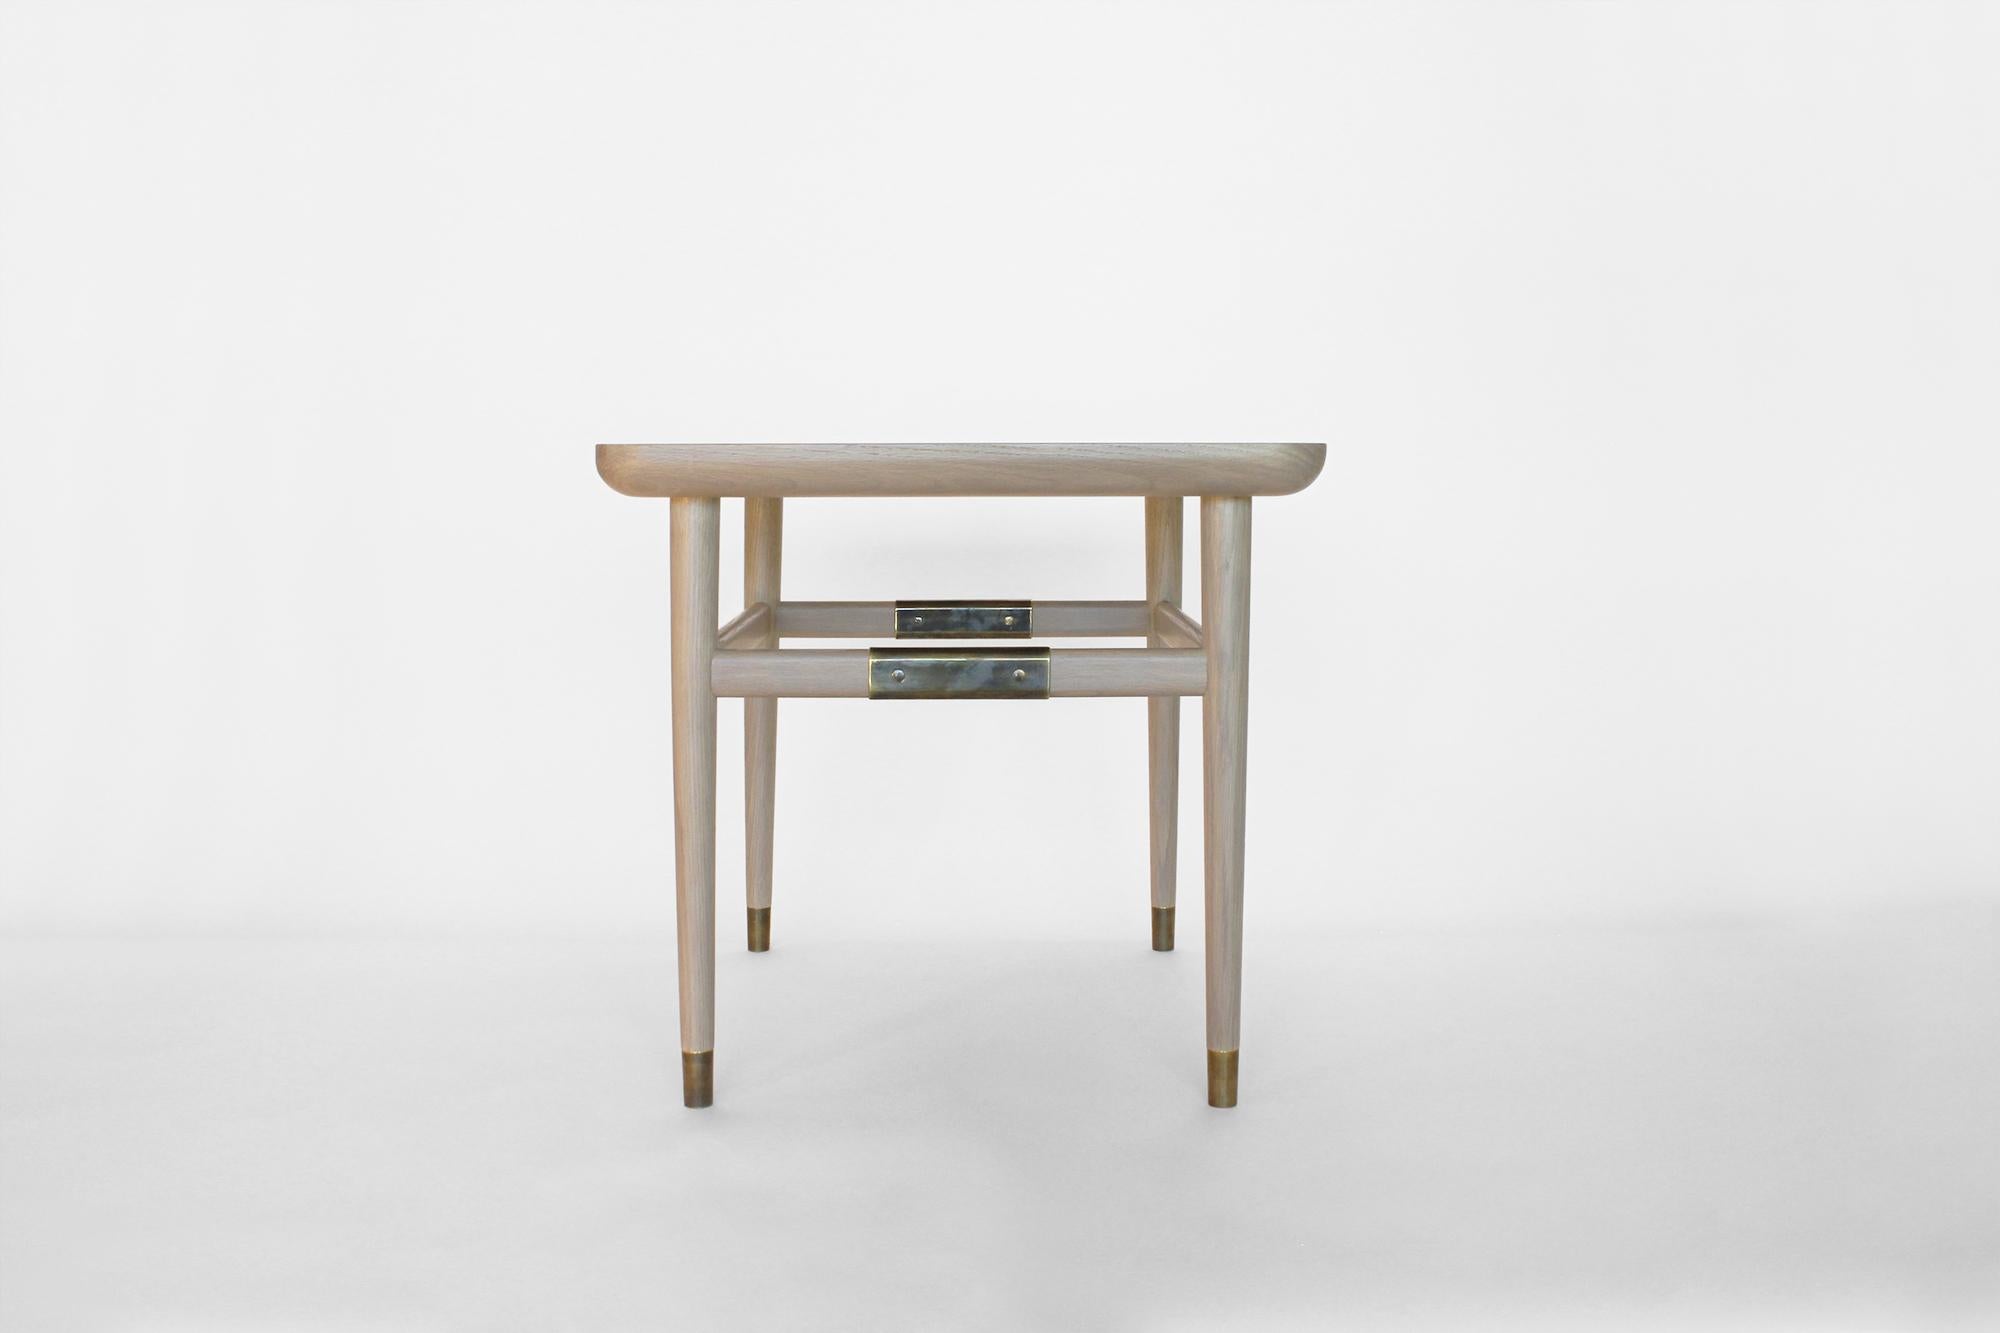 Oslo side table possesses a simple, enduring purity. With rectangular scooped tops, eased edges, and pops of brass, all are smooth to the touch and pleasing to the eye. At home in formal or informal settings, it is the perfect partner to both